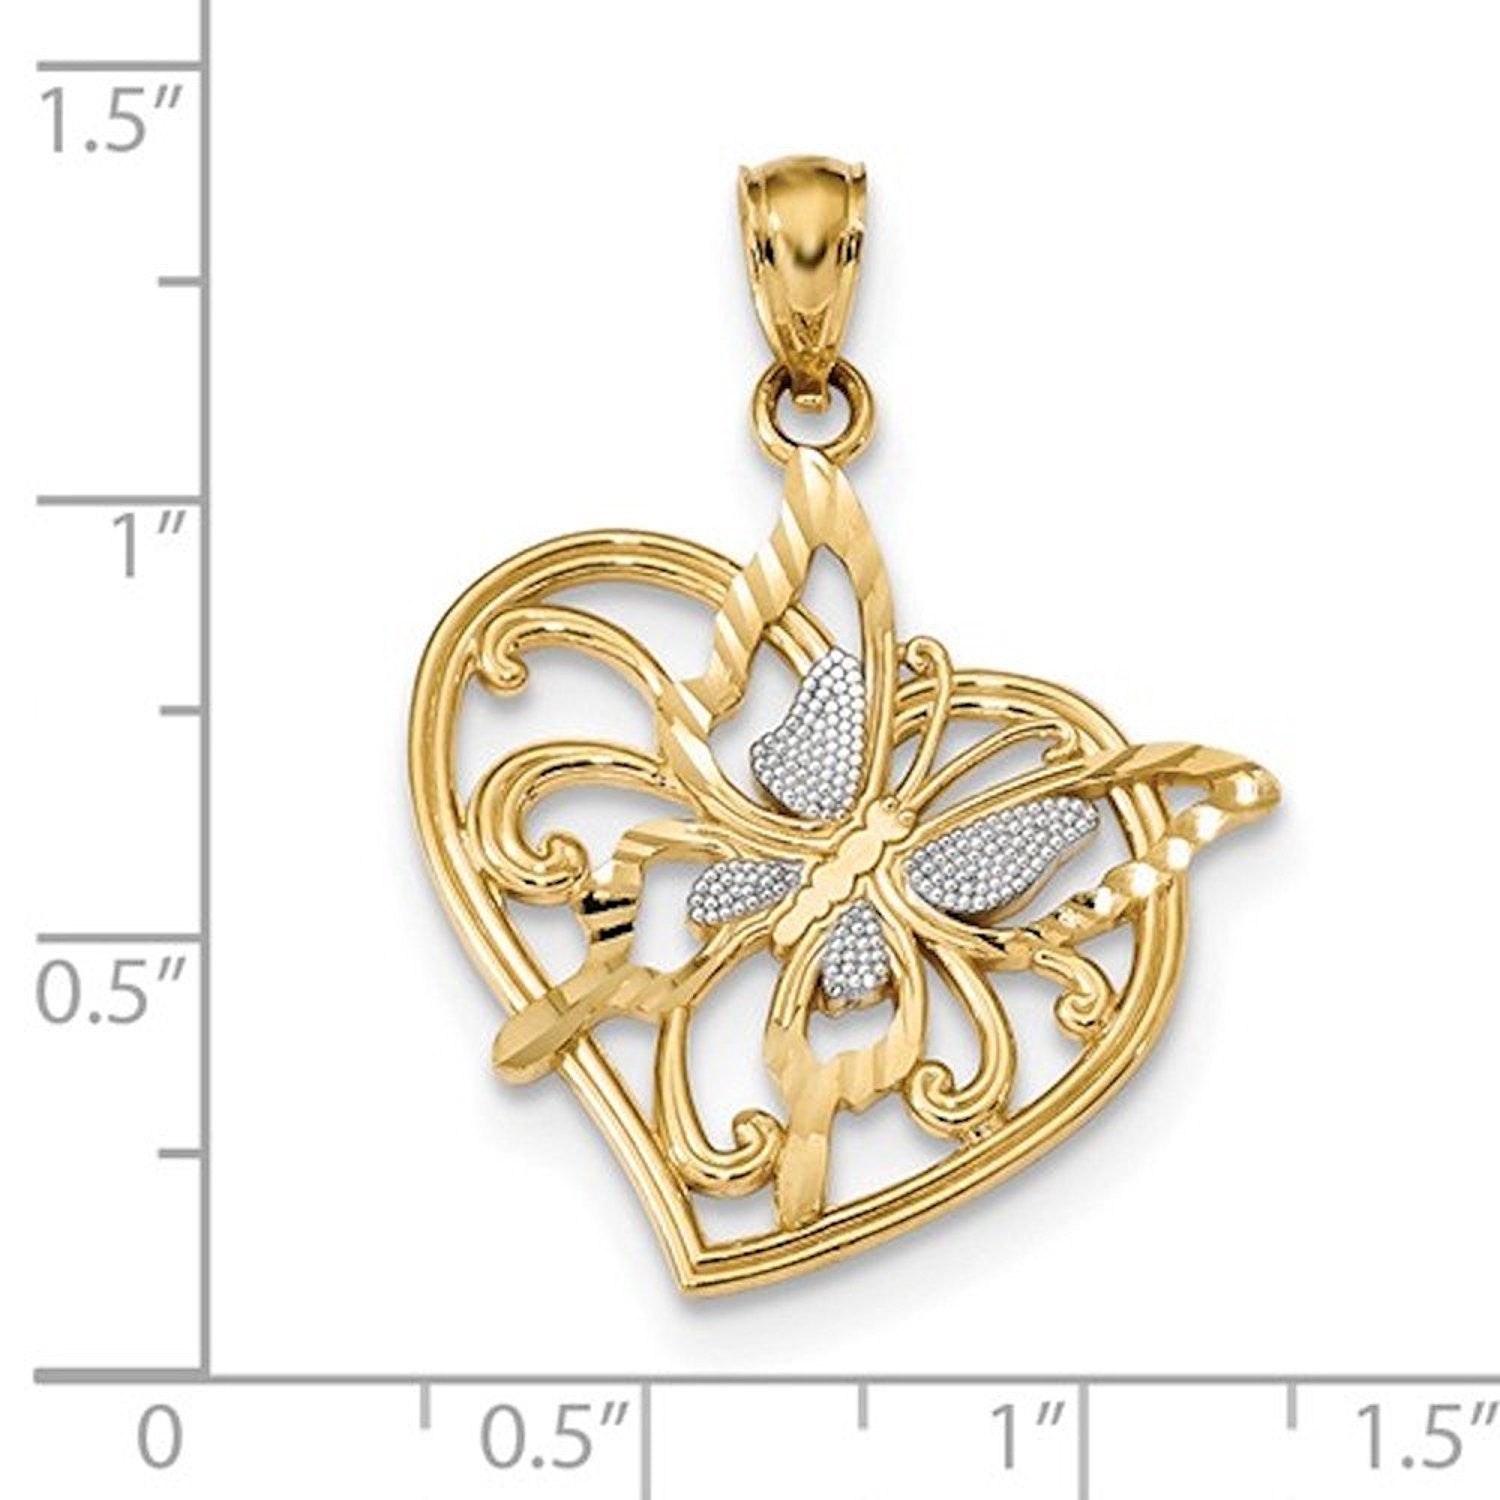 14k Yellow Gold and Rhodium Butterfly Heart Pendant Charm